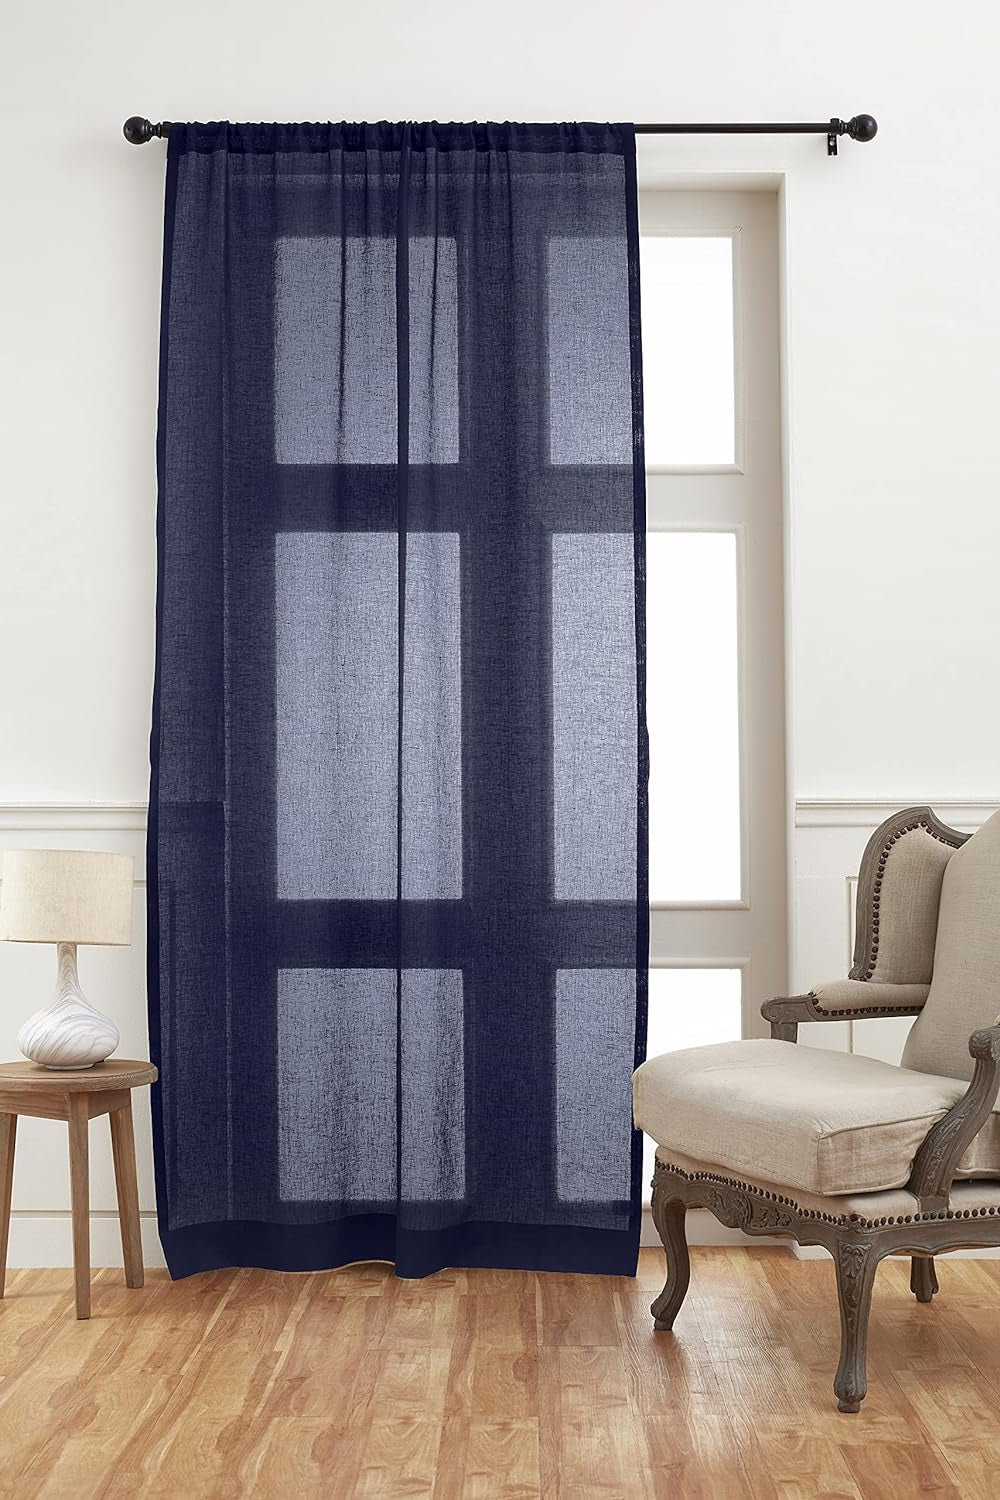 Solino Home Linen Sheer Curtain – 52 X 45 Inch Light Natural Rod Pocket Window Panel – 100% Pure Natural Fabric Curtain for Living Room, Indoor, Outdoor – Handcrafted from European Flax  Solino Home Navy 52 X 63 Inch 